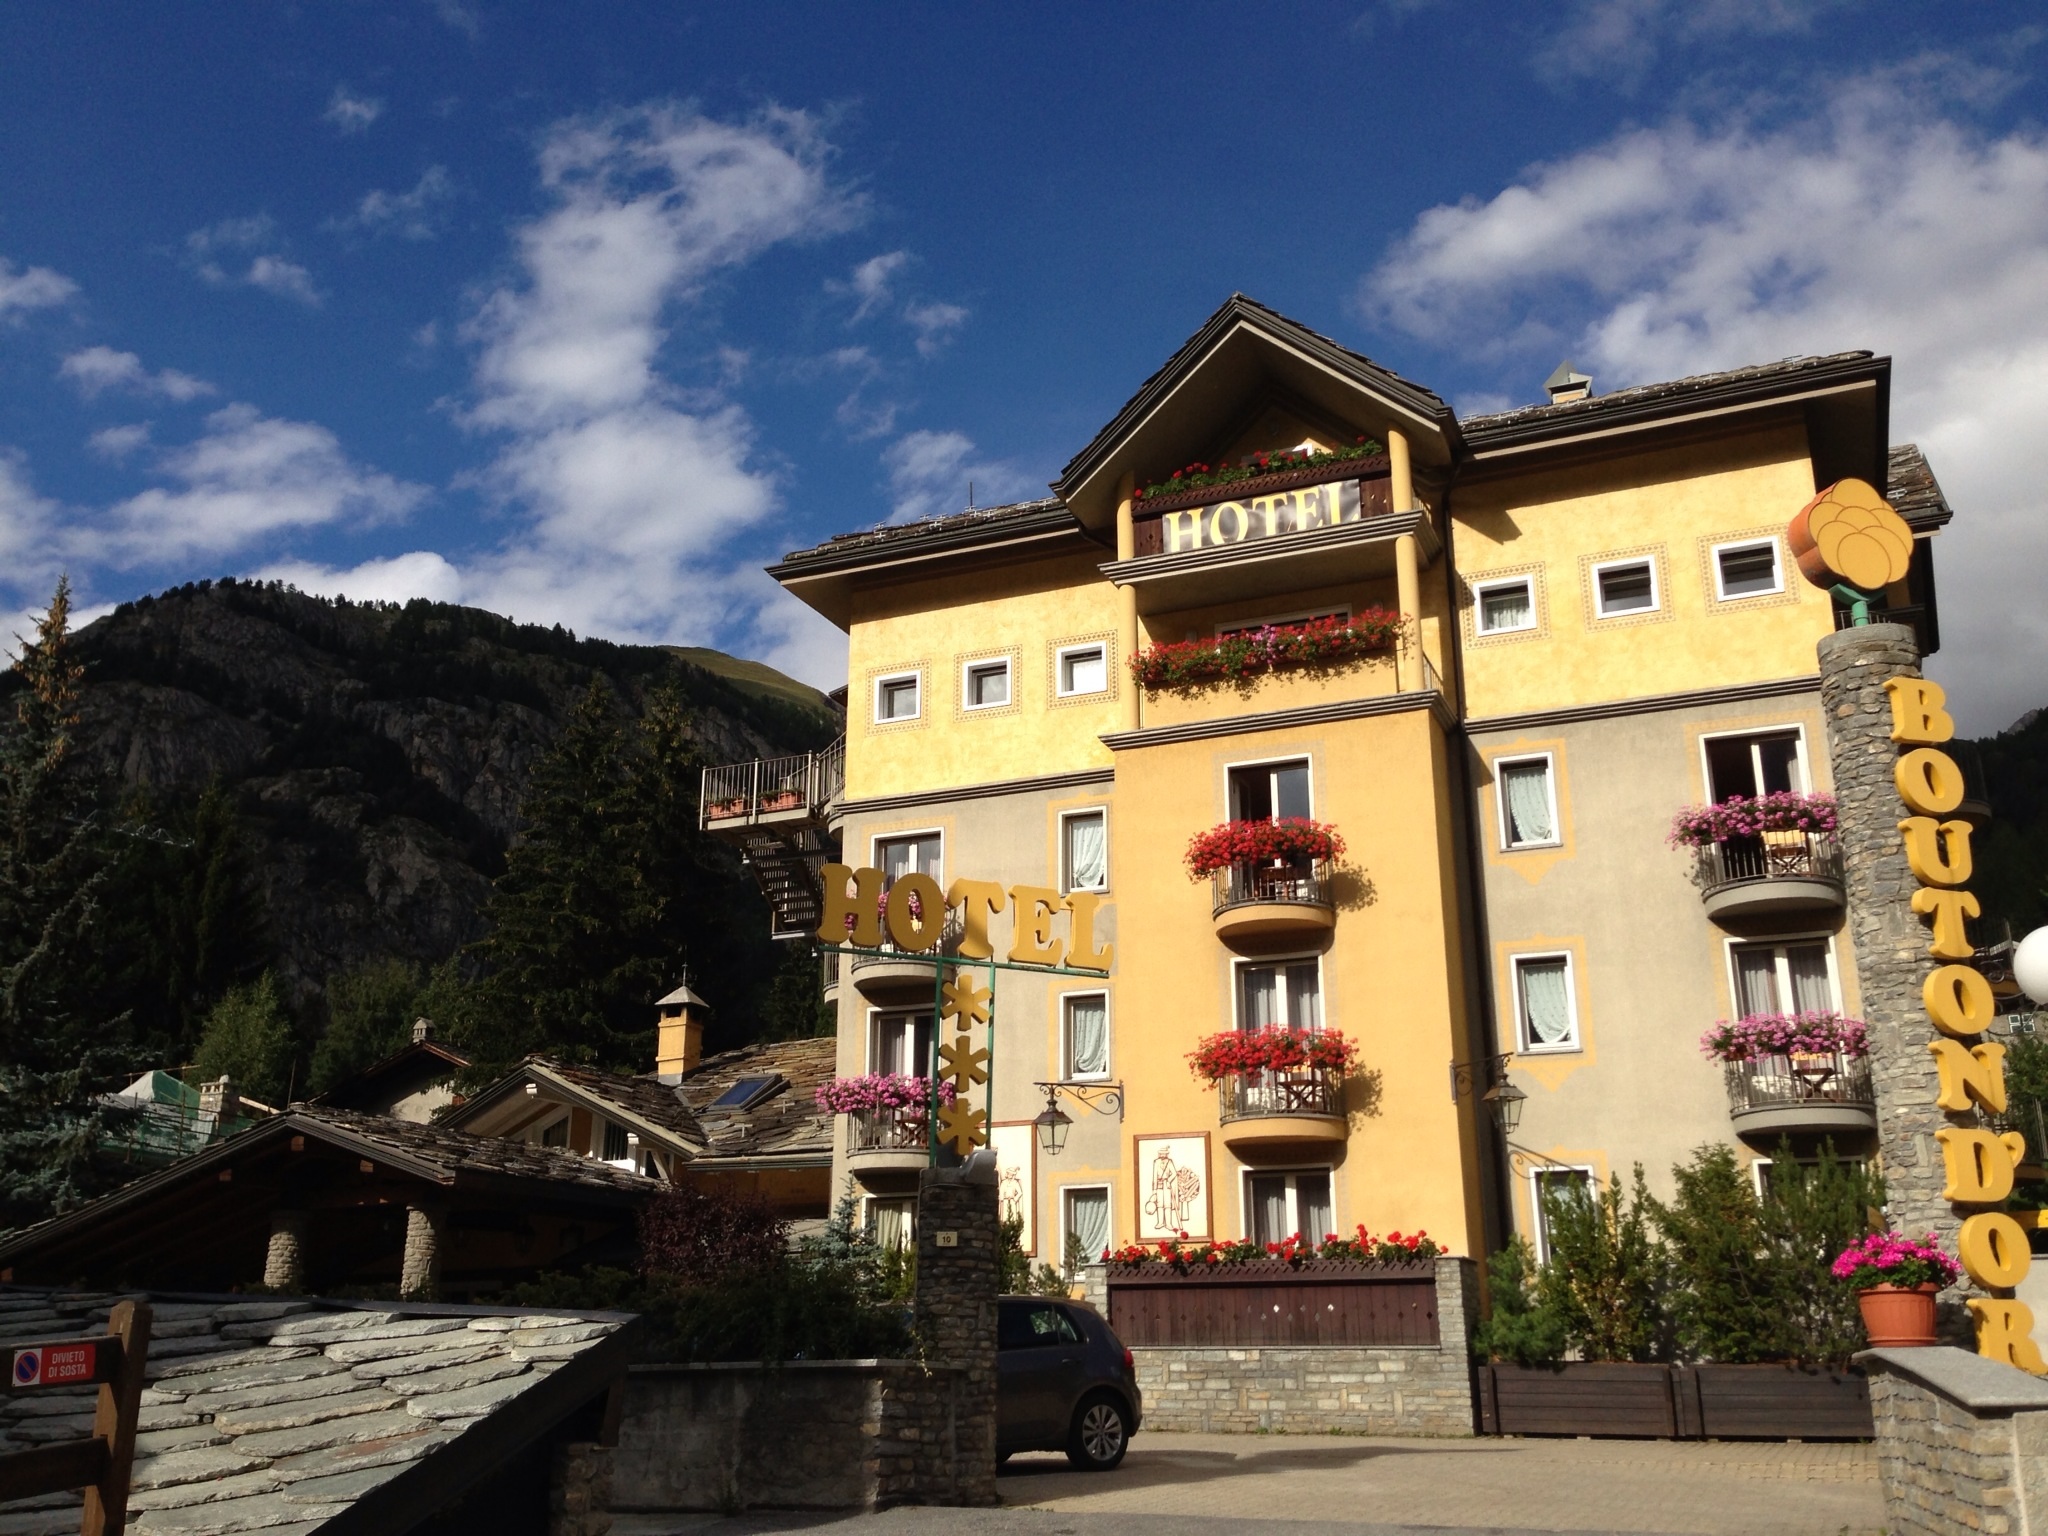 Bouton d'Or, our lovely hotel run by Patrizia and Andrea in Courmayeur, IT